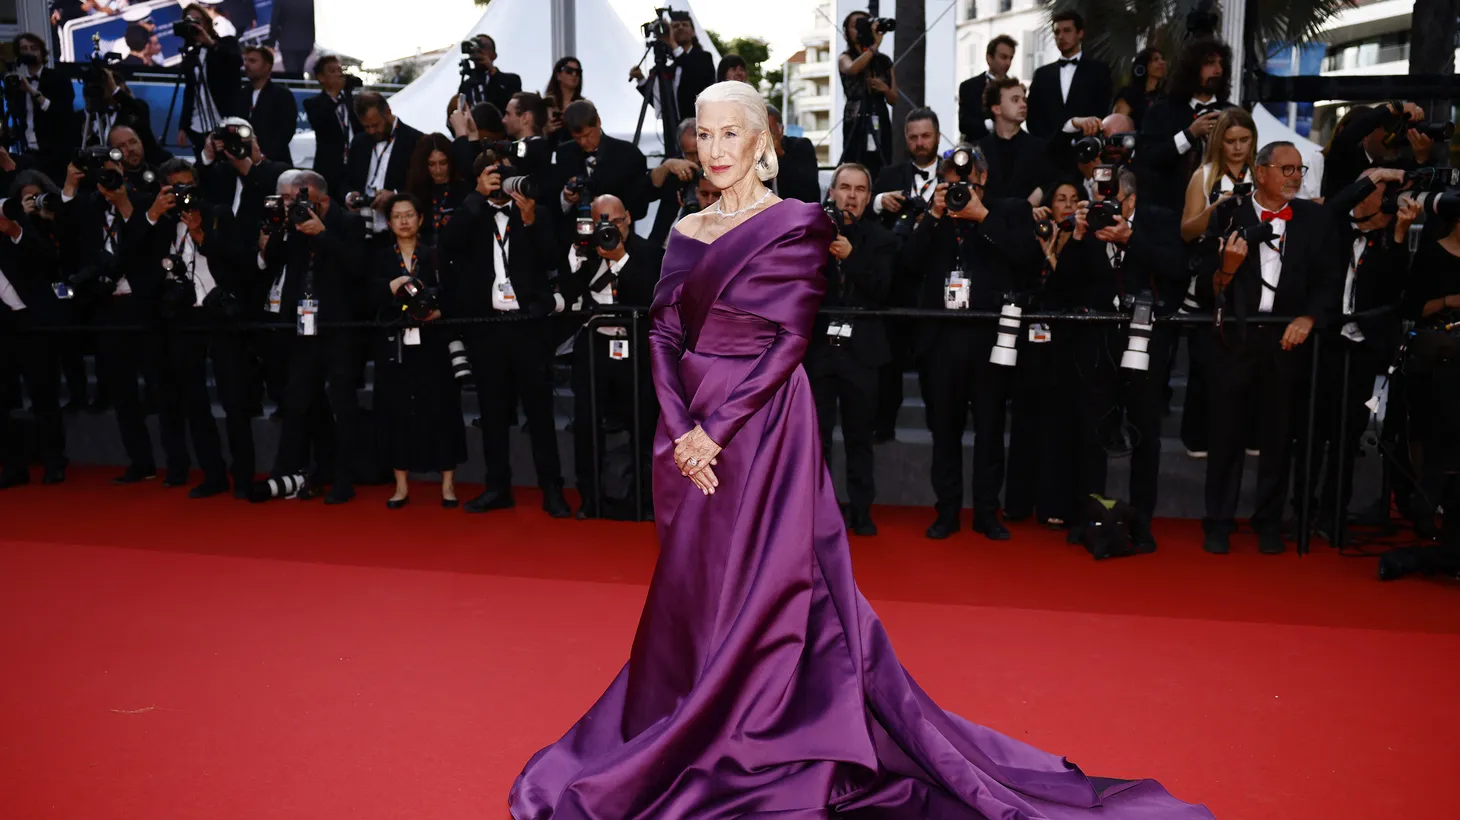 Helen Mirren poses on the red carpet during arrivals for the screening of the animated film "La plus precieuse des marchandises" (The Most Precious of Cargoes) in competition at the 77th Cannes Film Festival in Cannes, France, May 24, 2024.